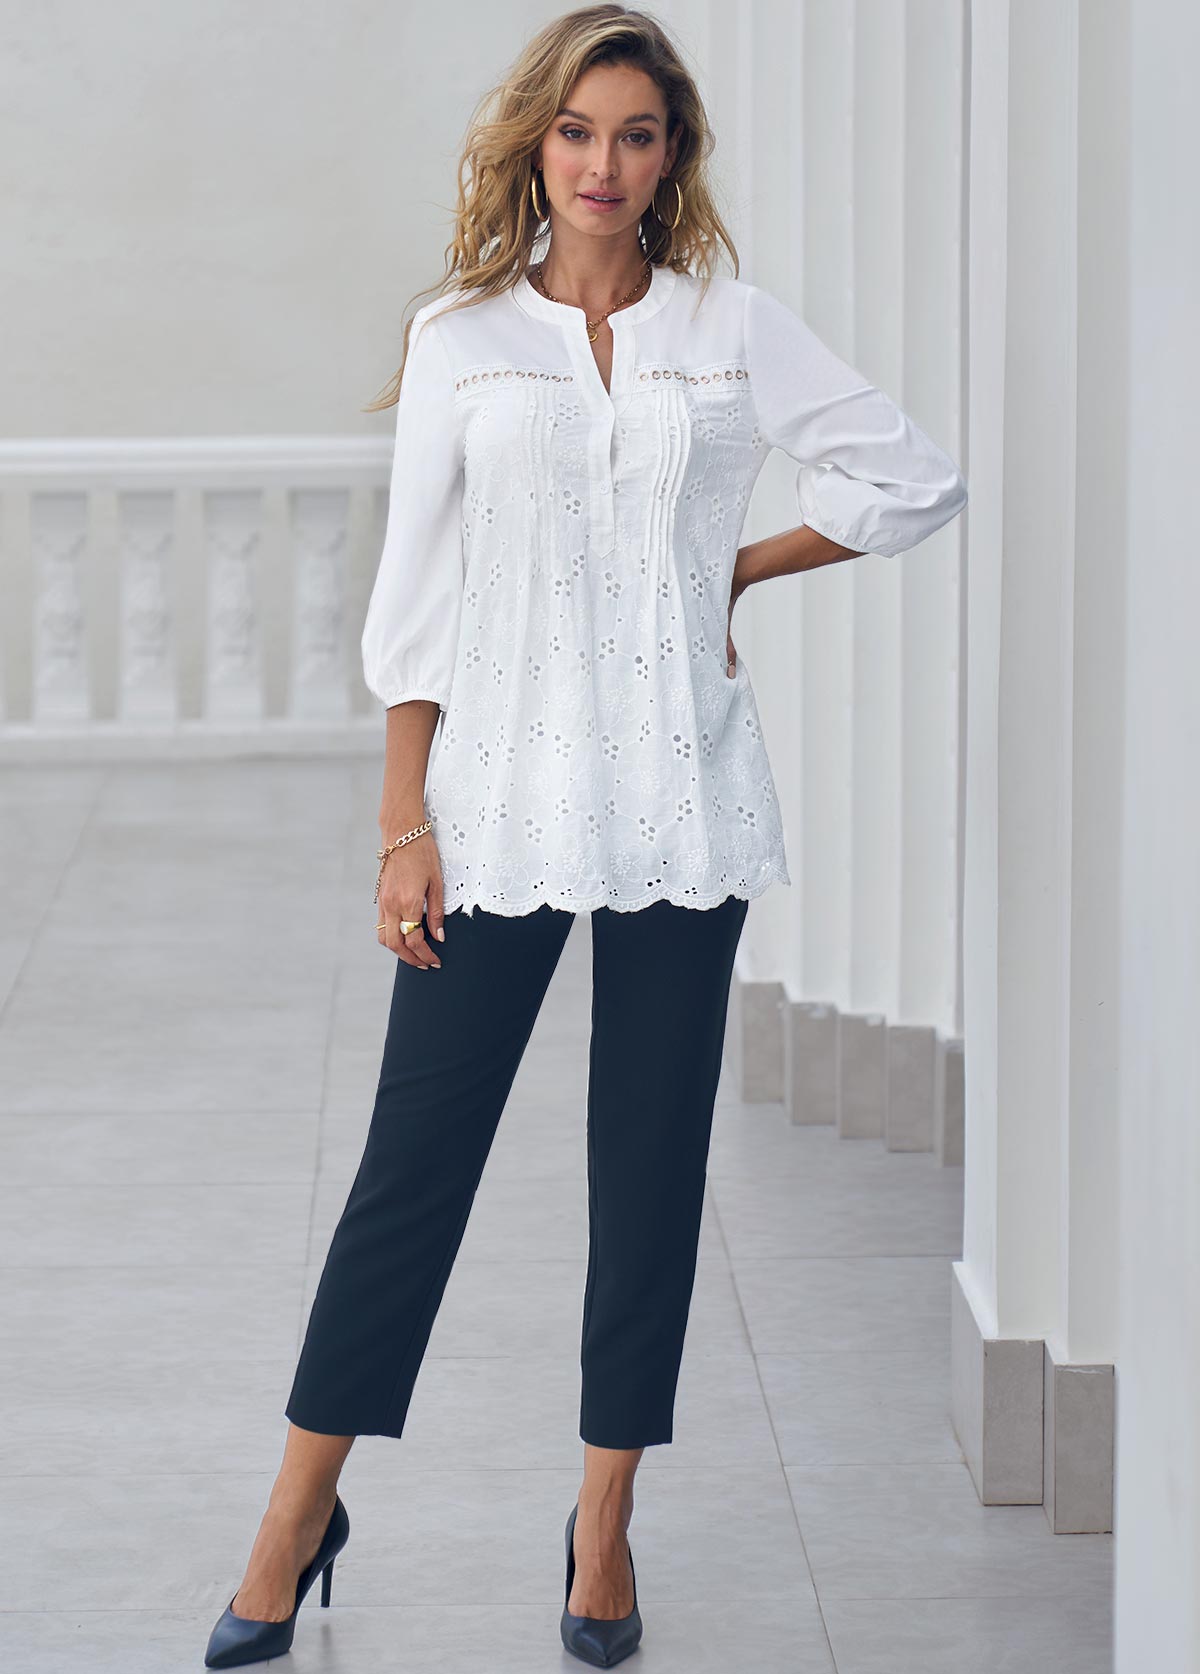 Hollow Out Split Neck White Embroidered Blouse